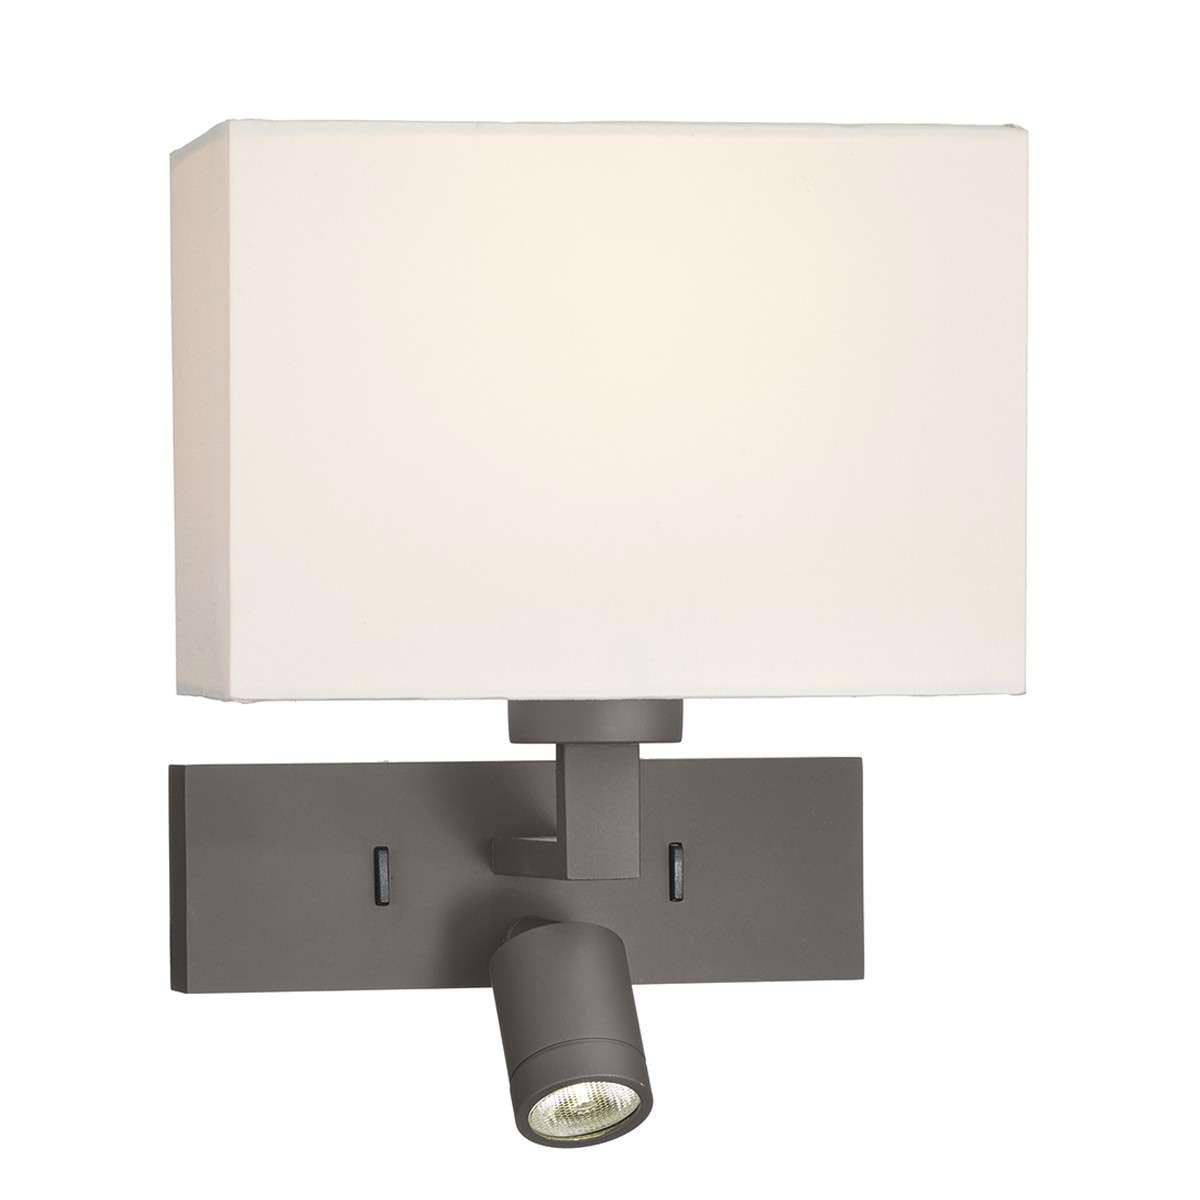 Dar Modena Bronze Switched Wall Light With LED Reading Lamp